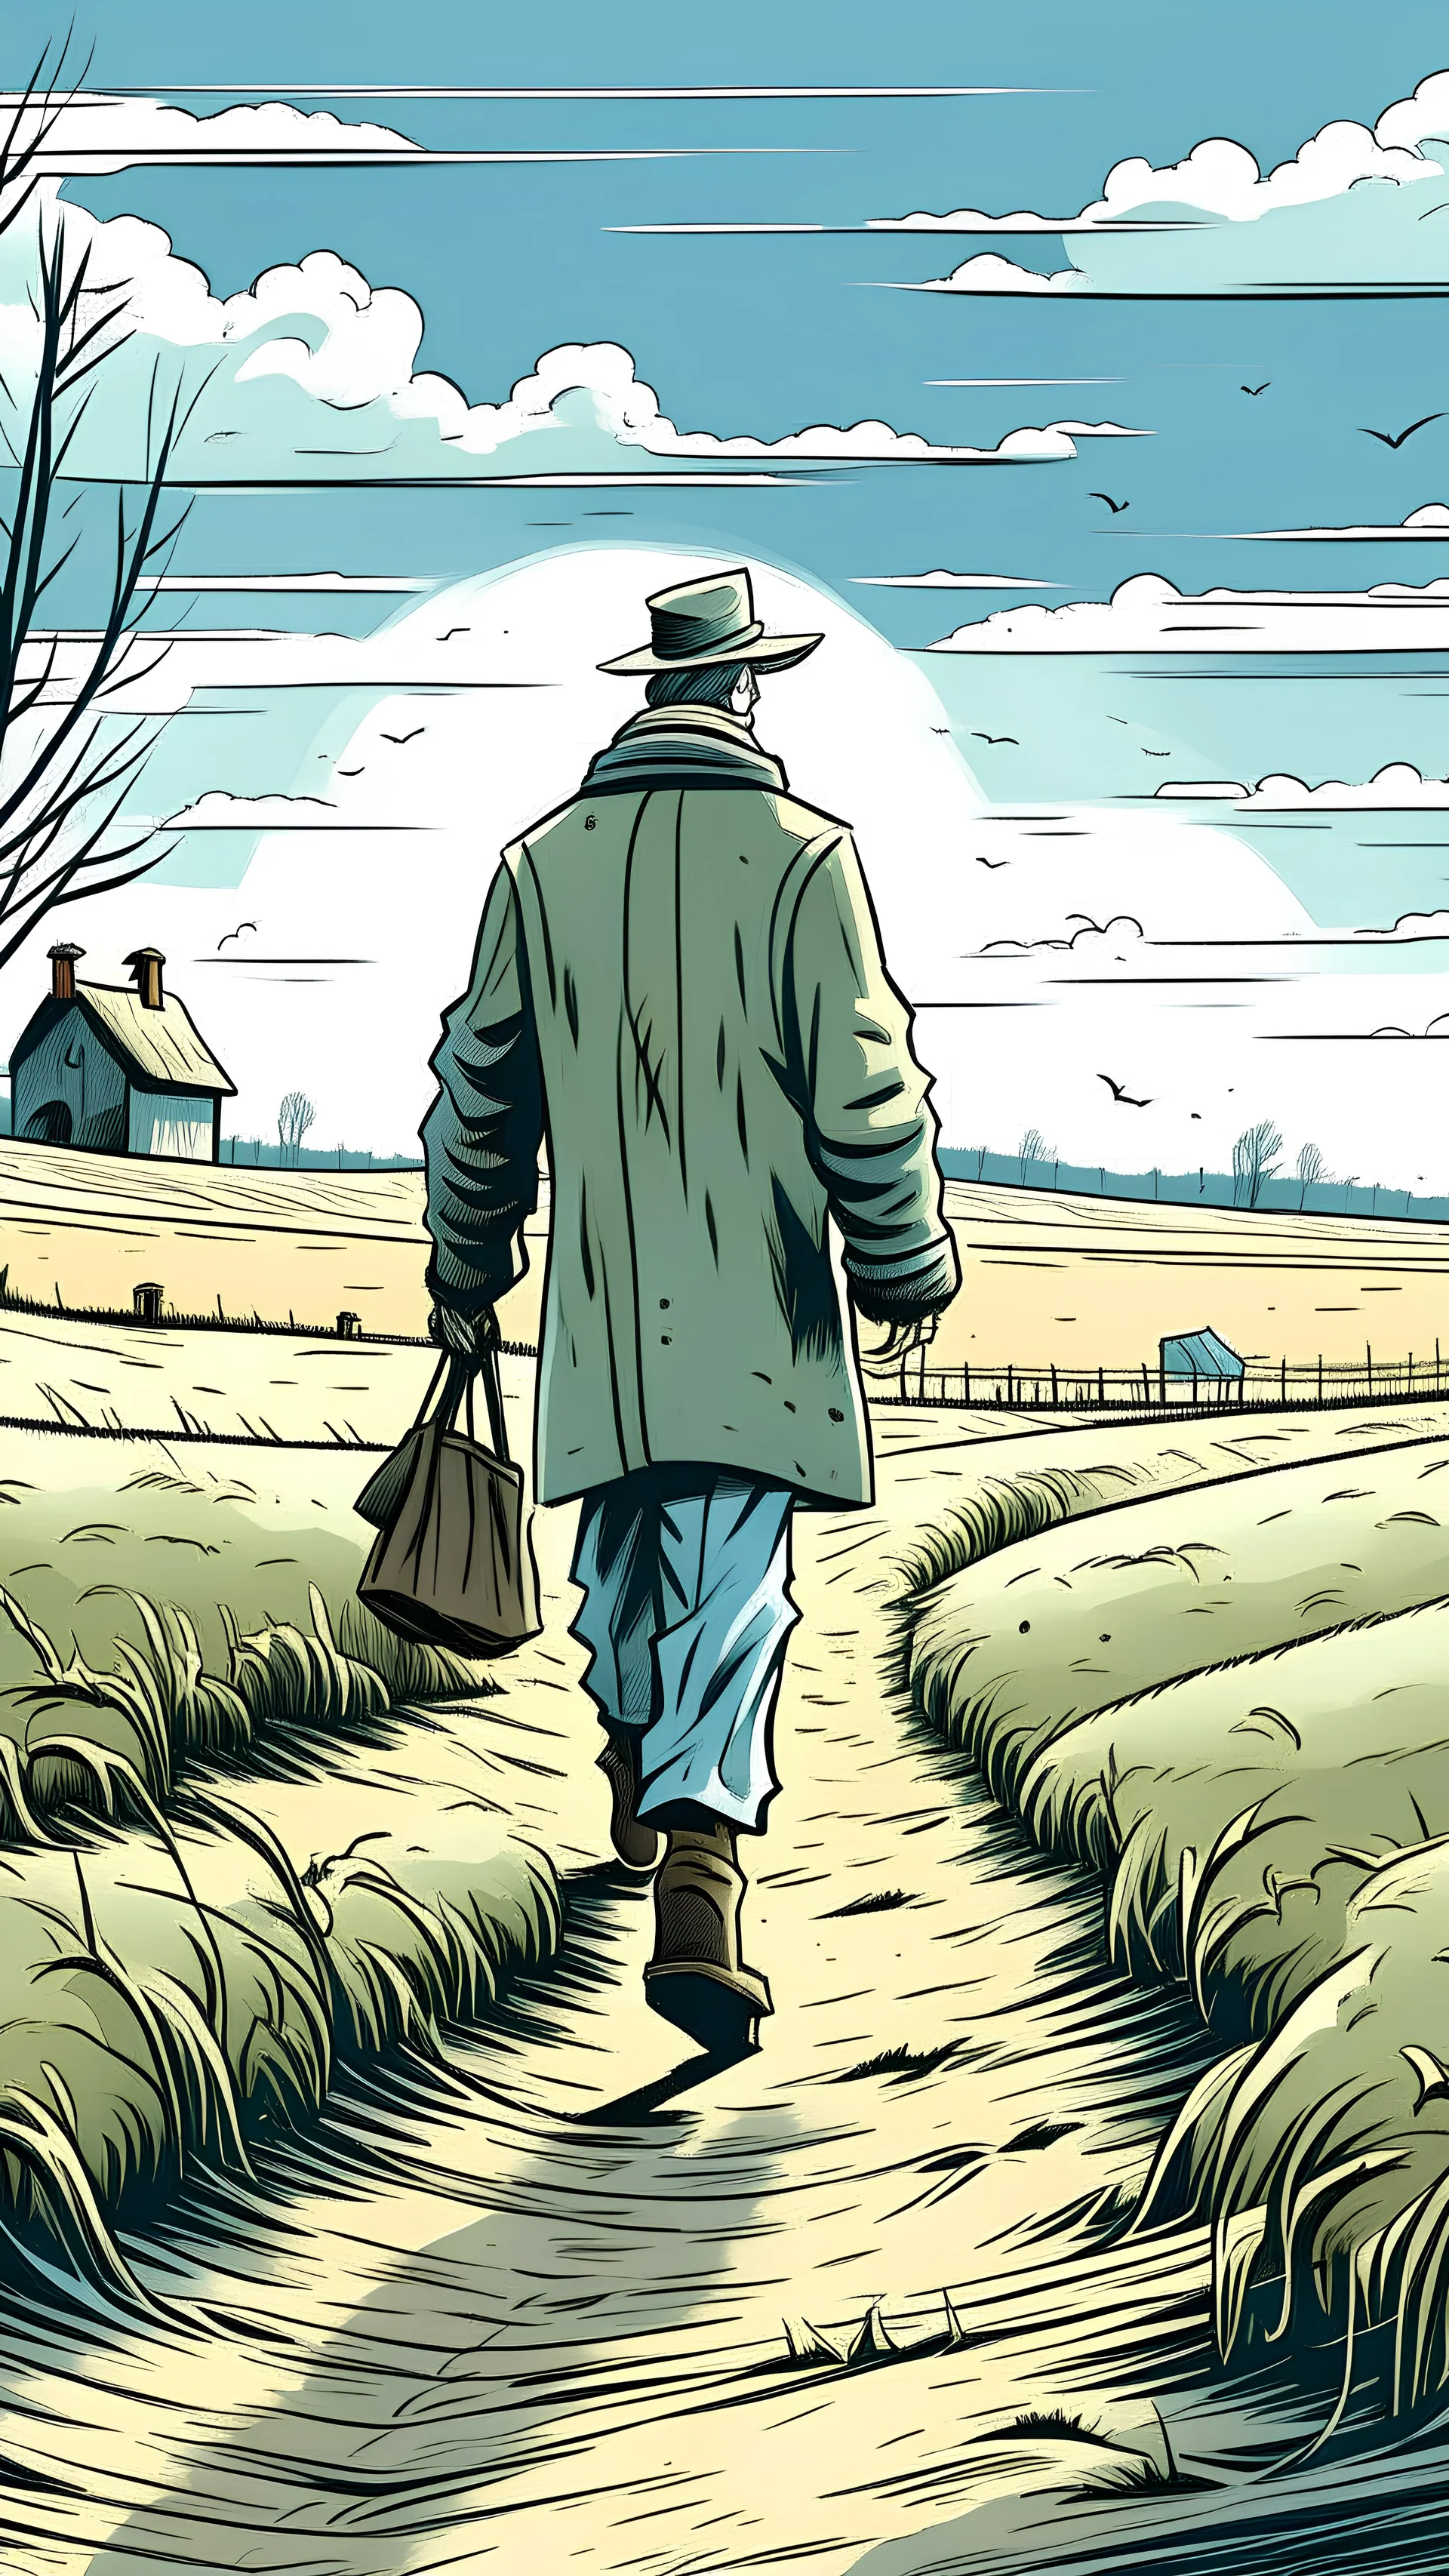 One cold winter day, a farmer was walking through his field. Cartoon image